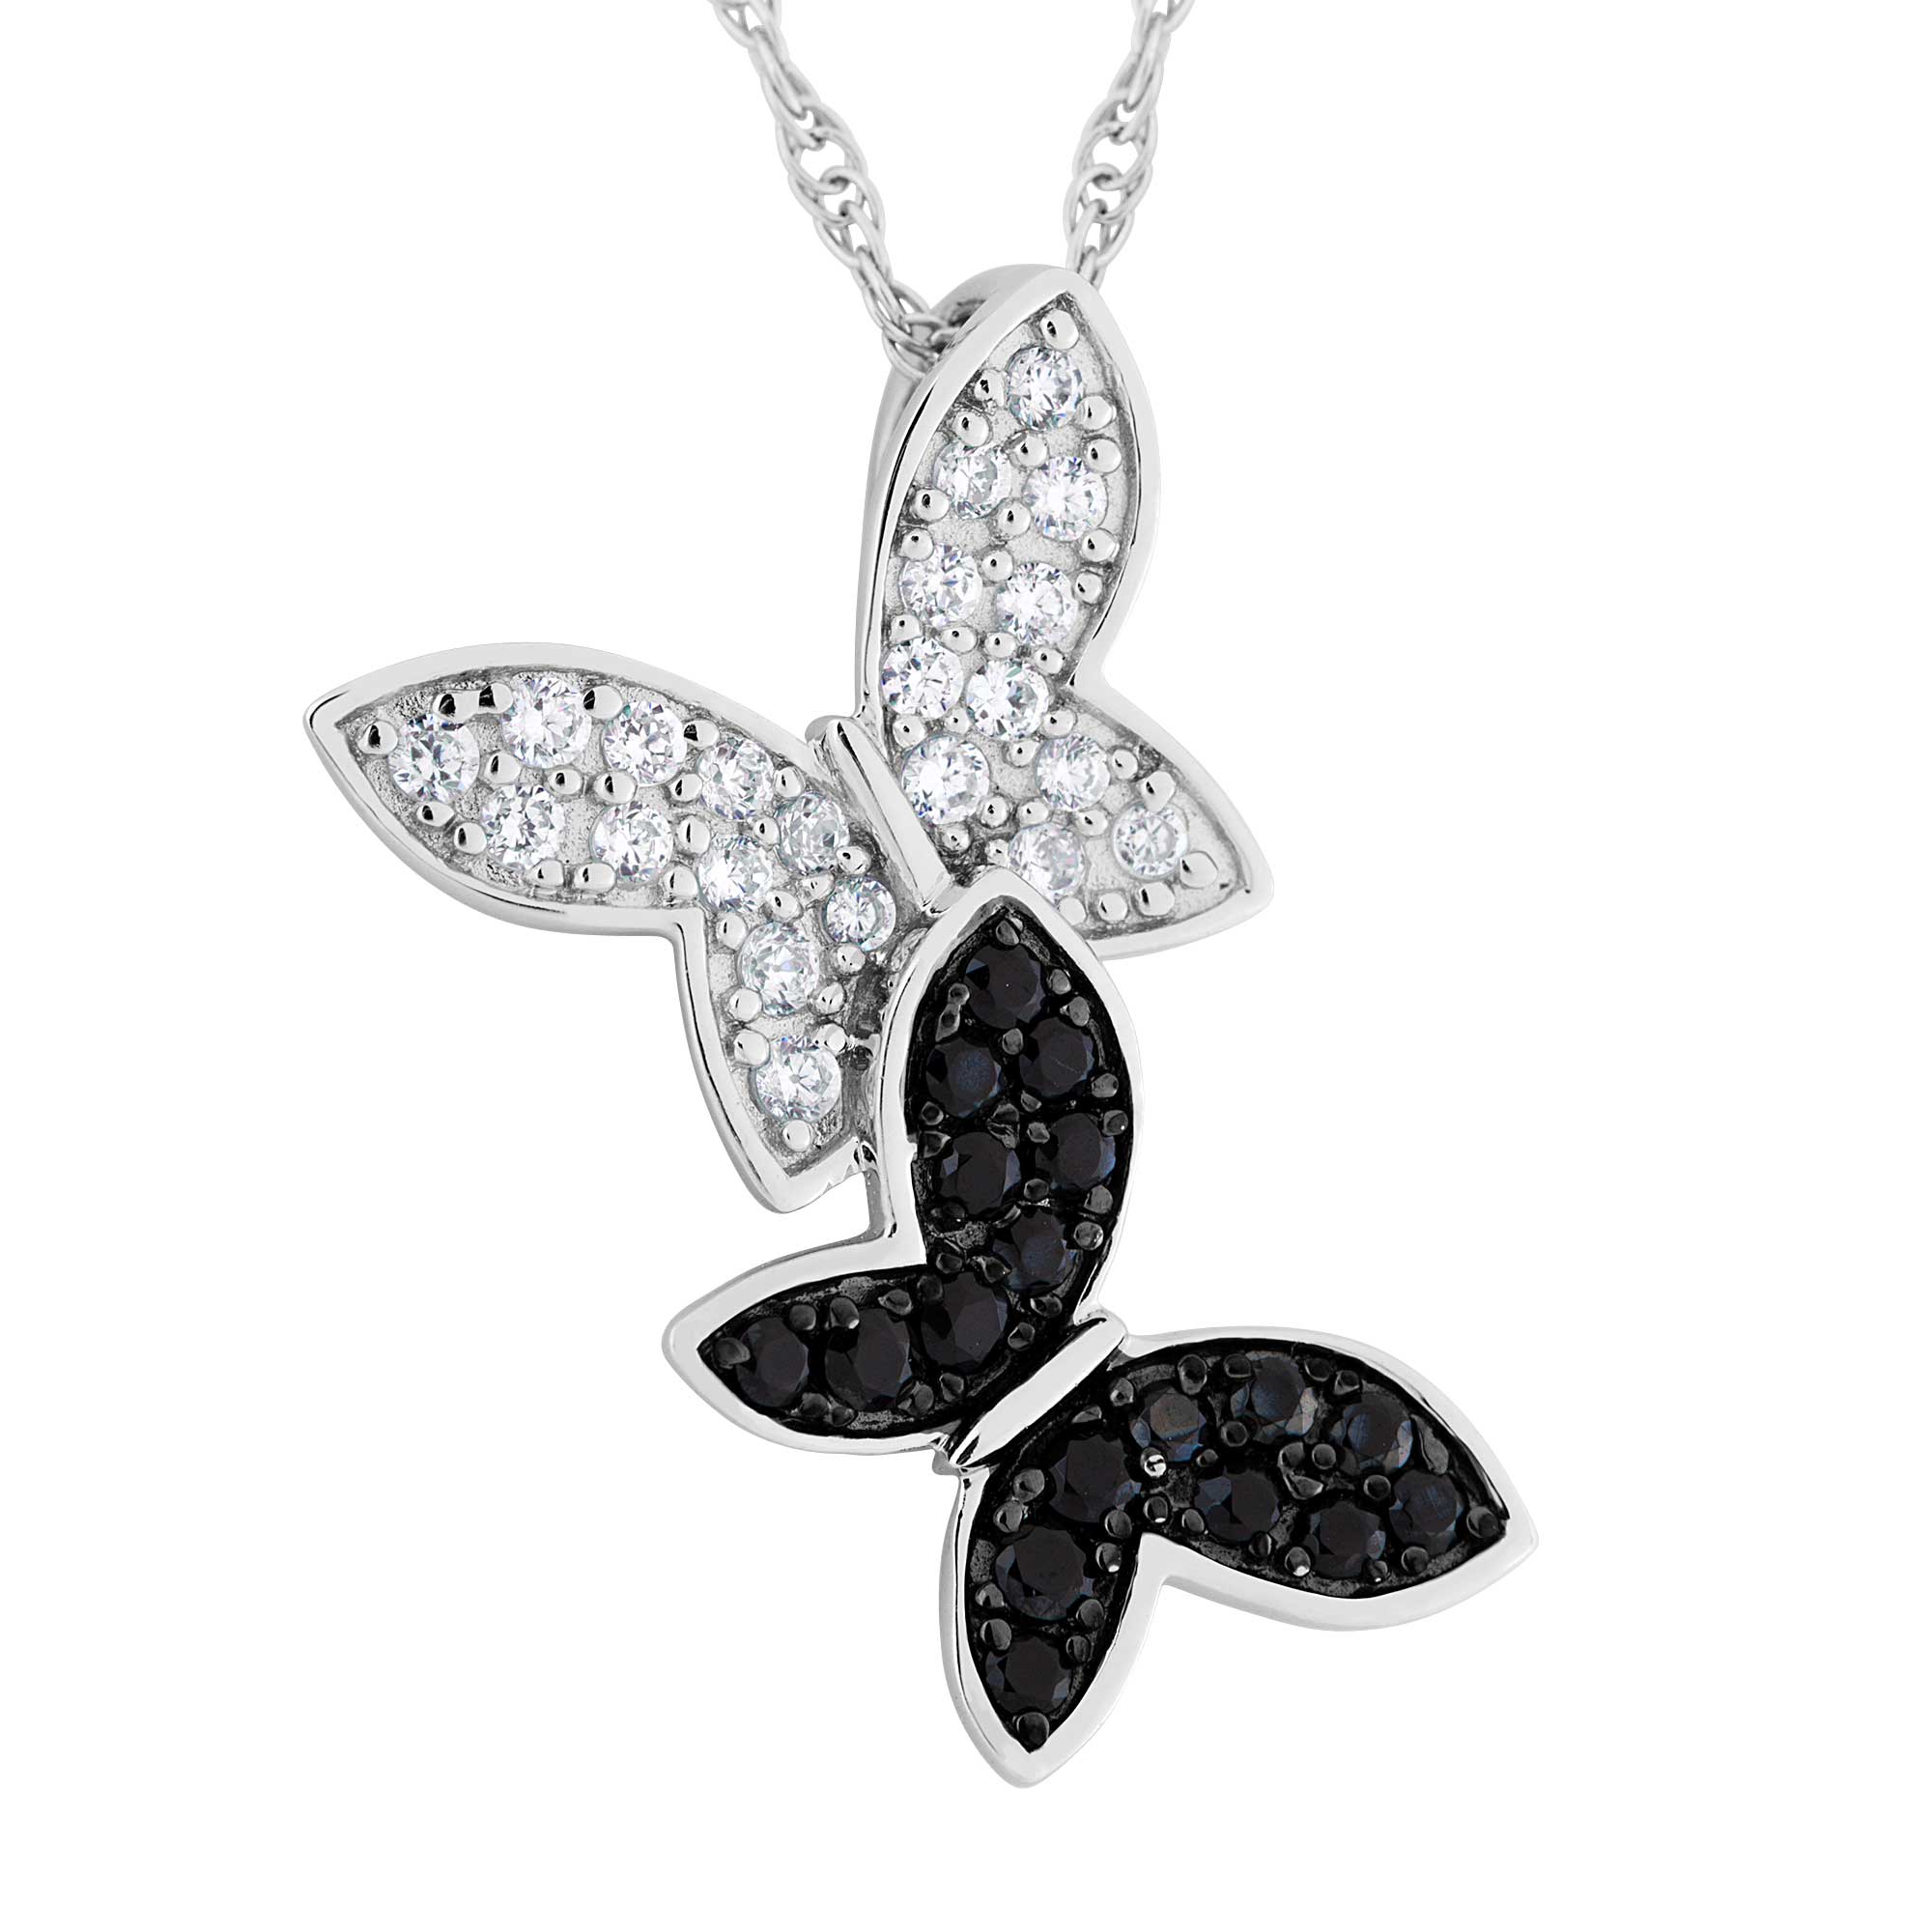 White CZ and Black Spinel Butterfly Pendant Necklace, Rhodium Plated Sterling Silver, 18